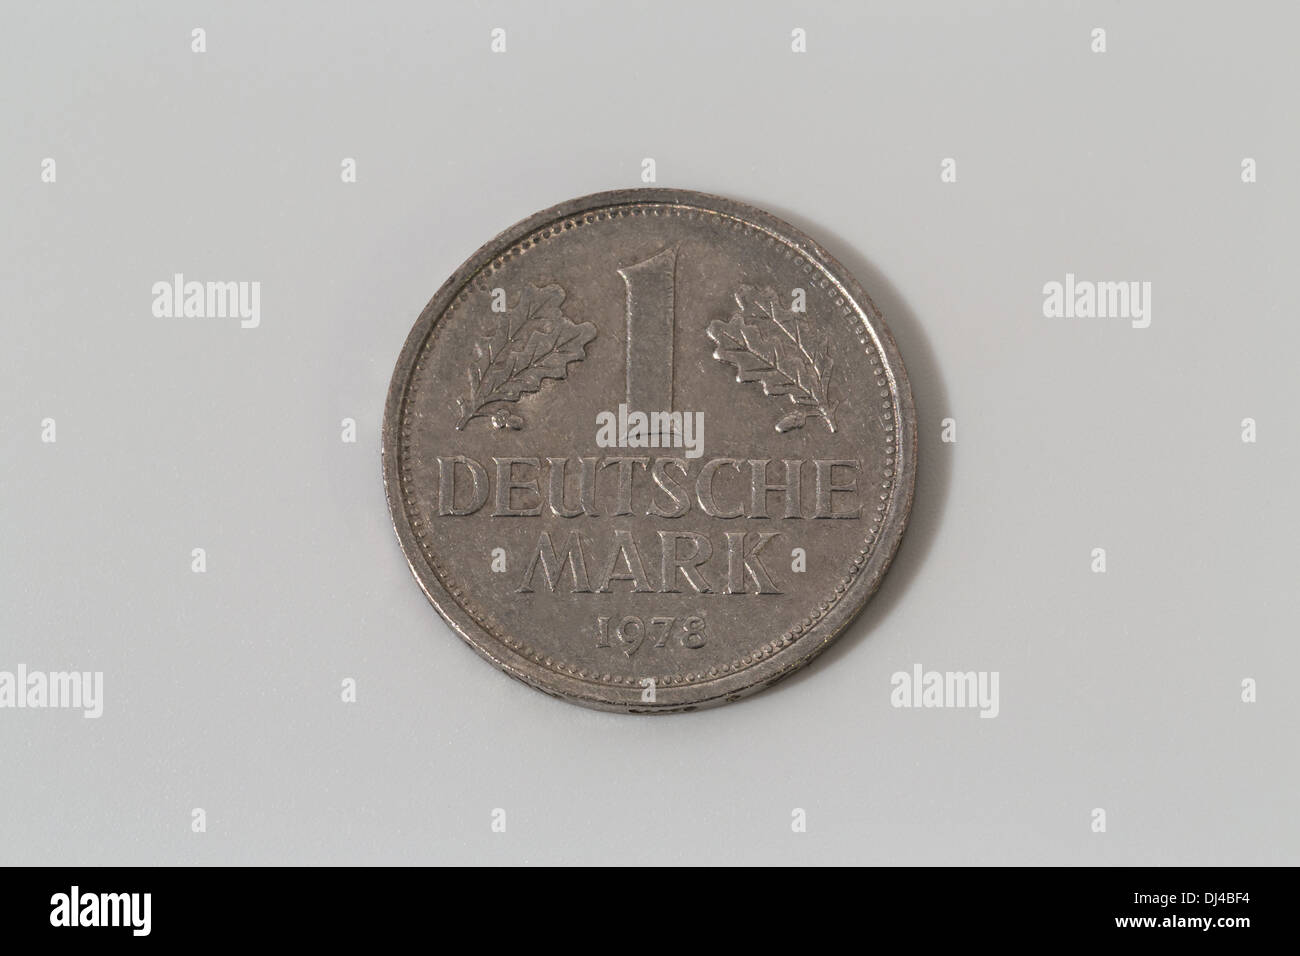 A close up photograph of one Deutsche Mark (Deutschmark; German Mark). A single coin isolated on white background. Stock Photo